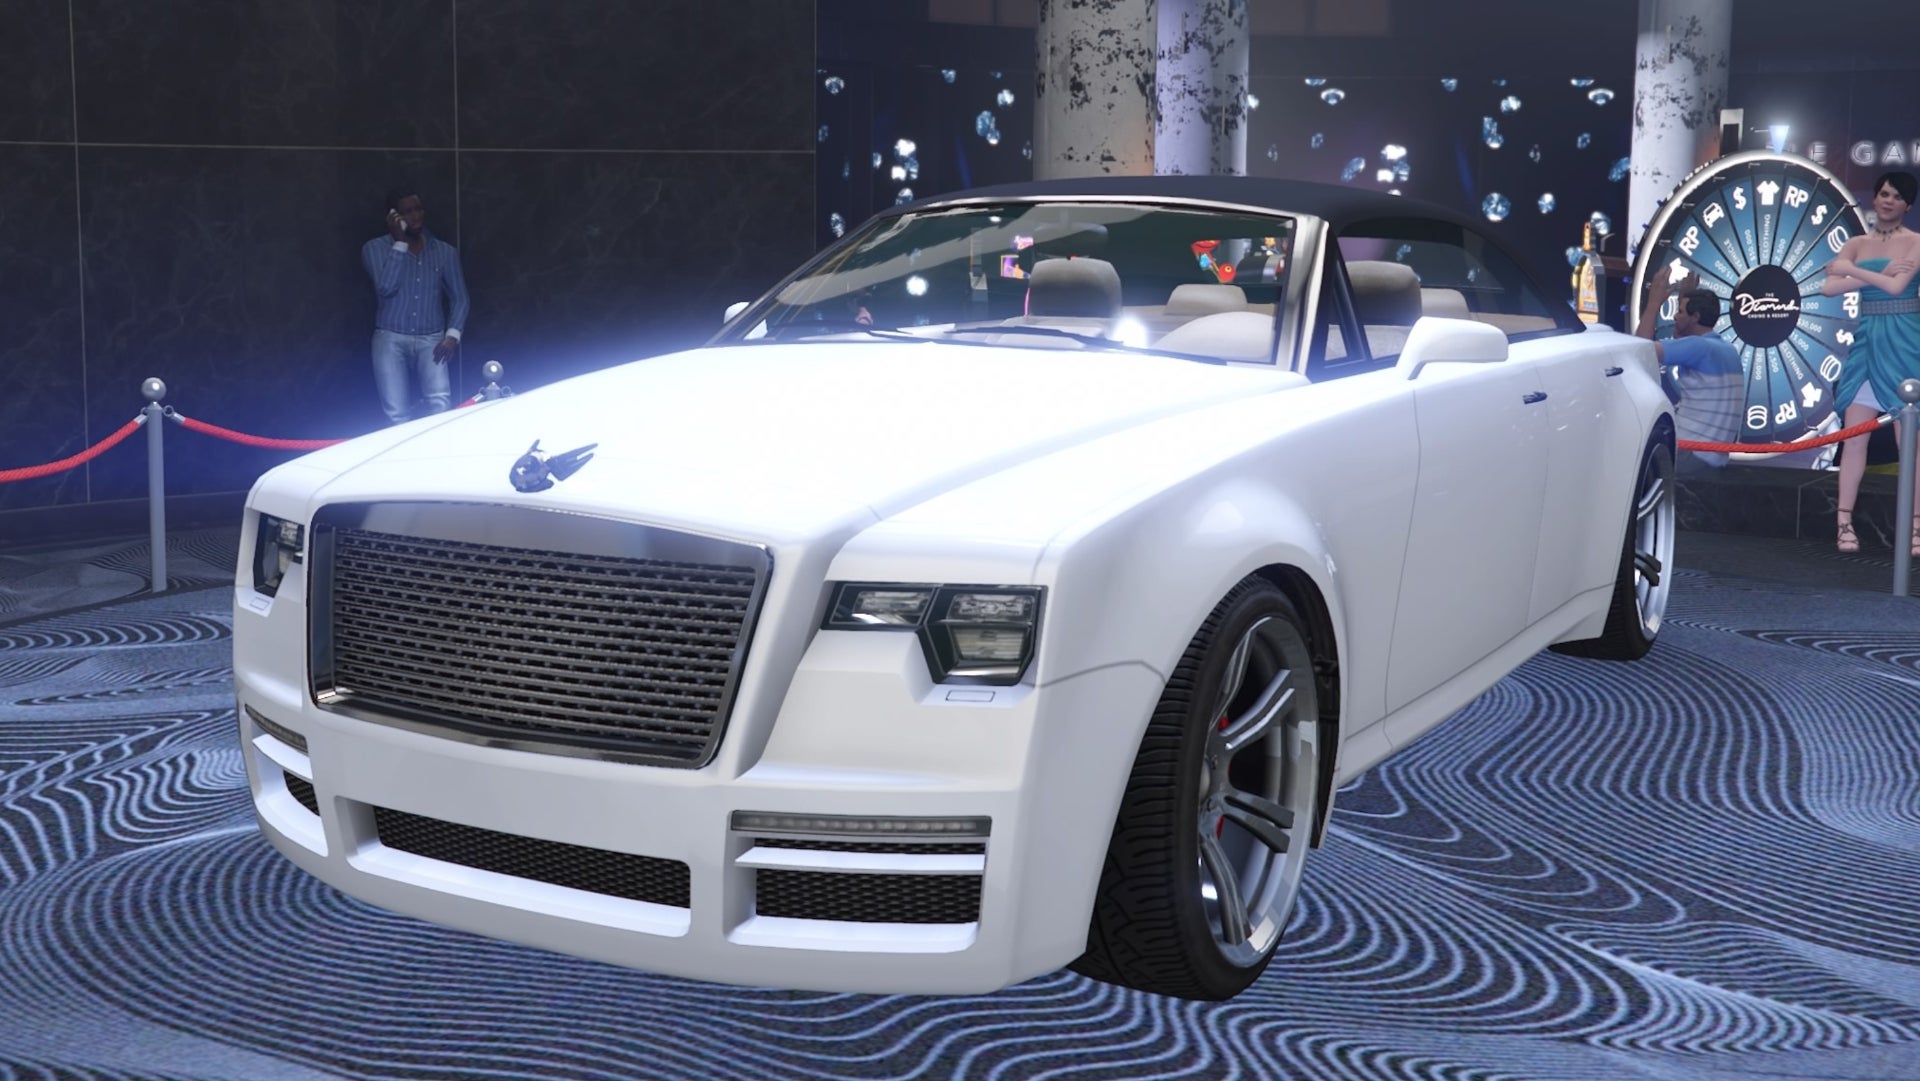 GTA Online, a white Enus Windsor Drop is parked on the podium in the middle of the Diamond Casino.